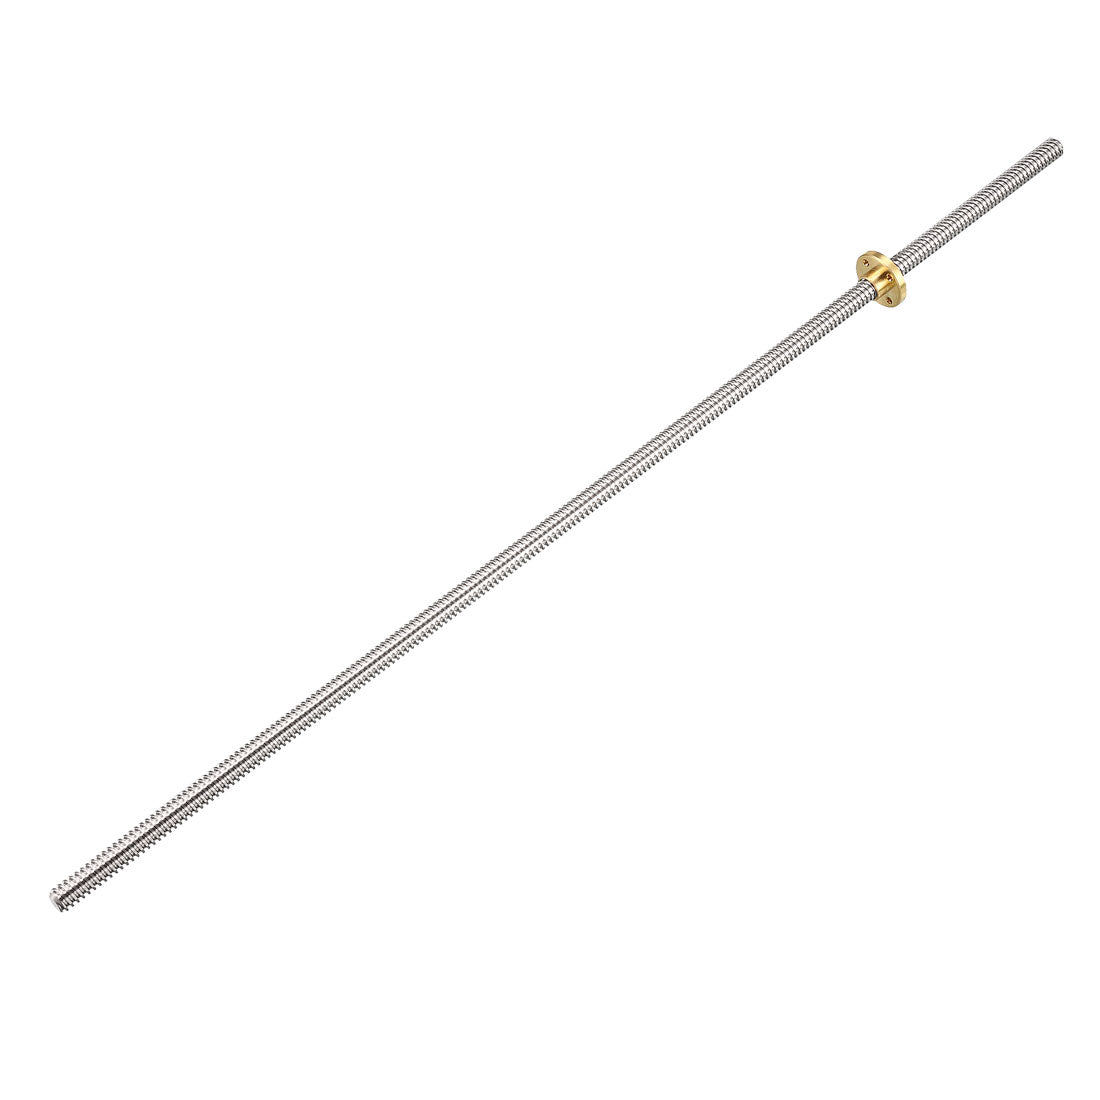 uxcell Uxcell 400mm T8 Pitch 2mm Lead 2mm Lead Screw Rod with Copper Nut for 3D Printer